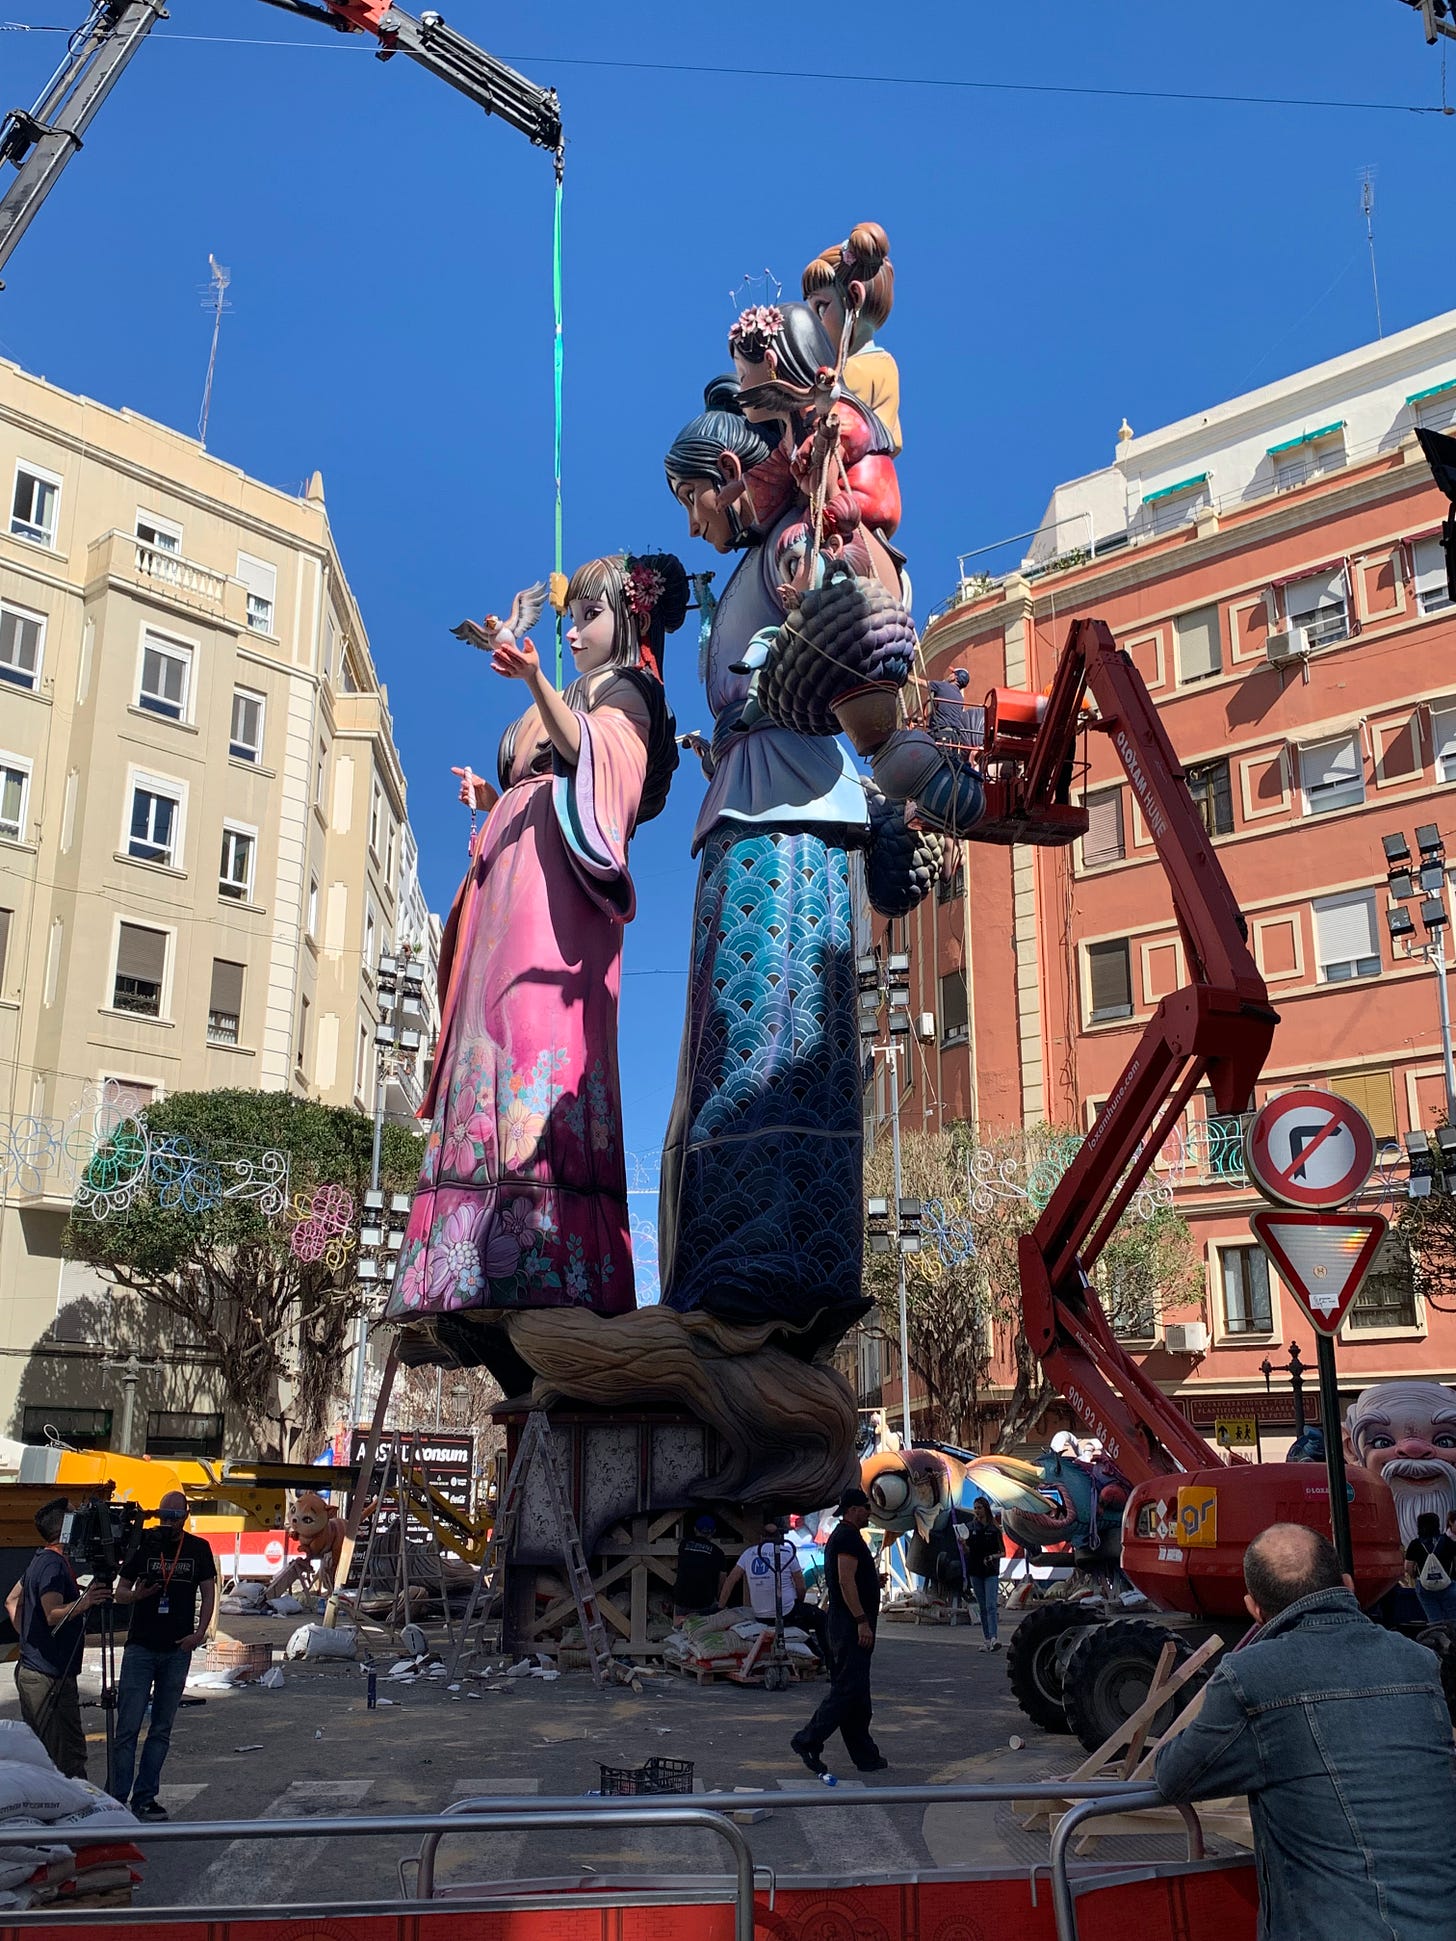 A crane lifts part of a giant Falla into place while staff on a cherry picker works on another section, high above the ground